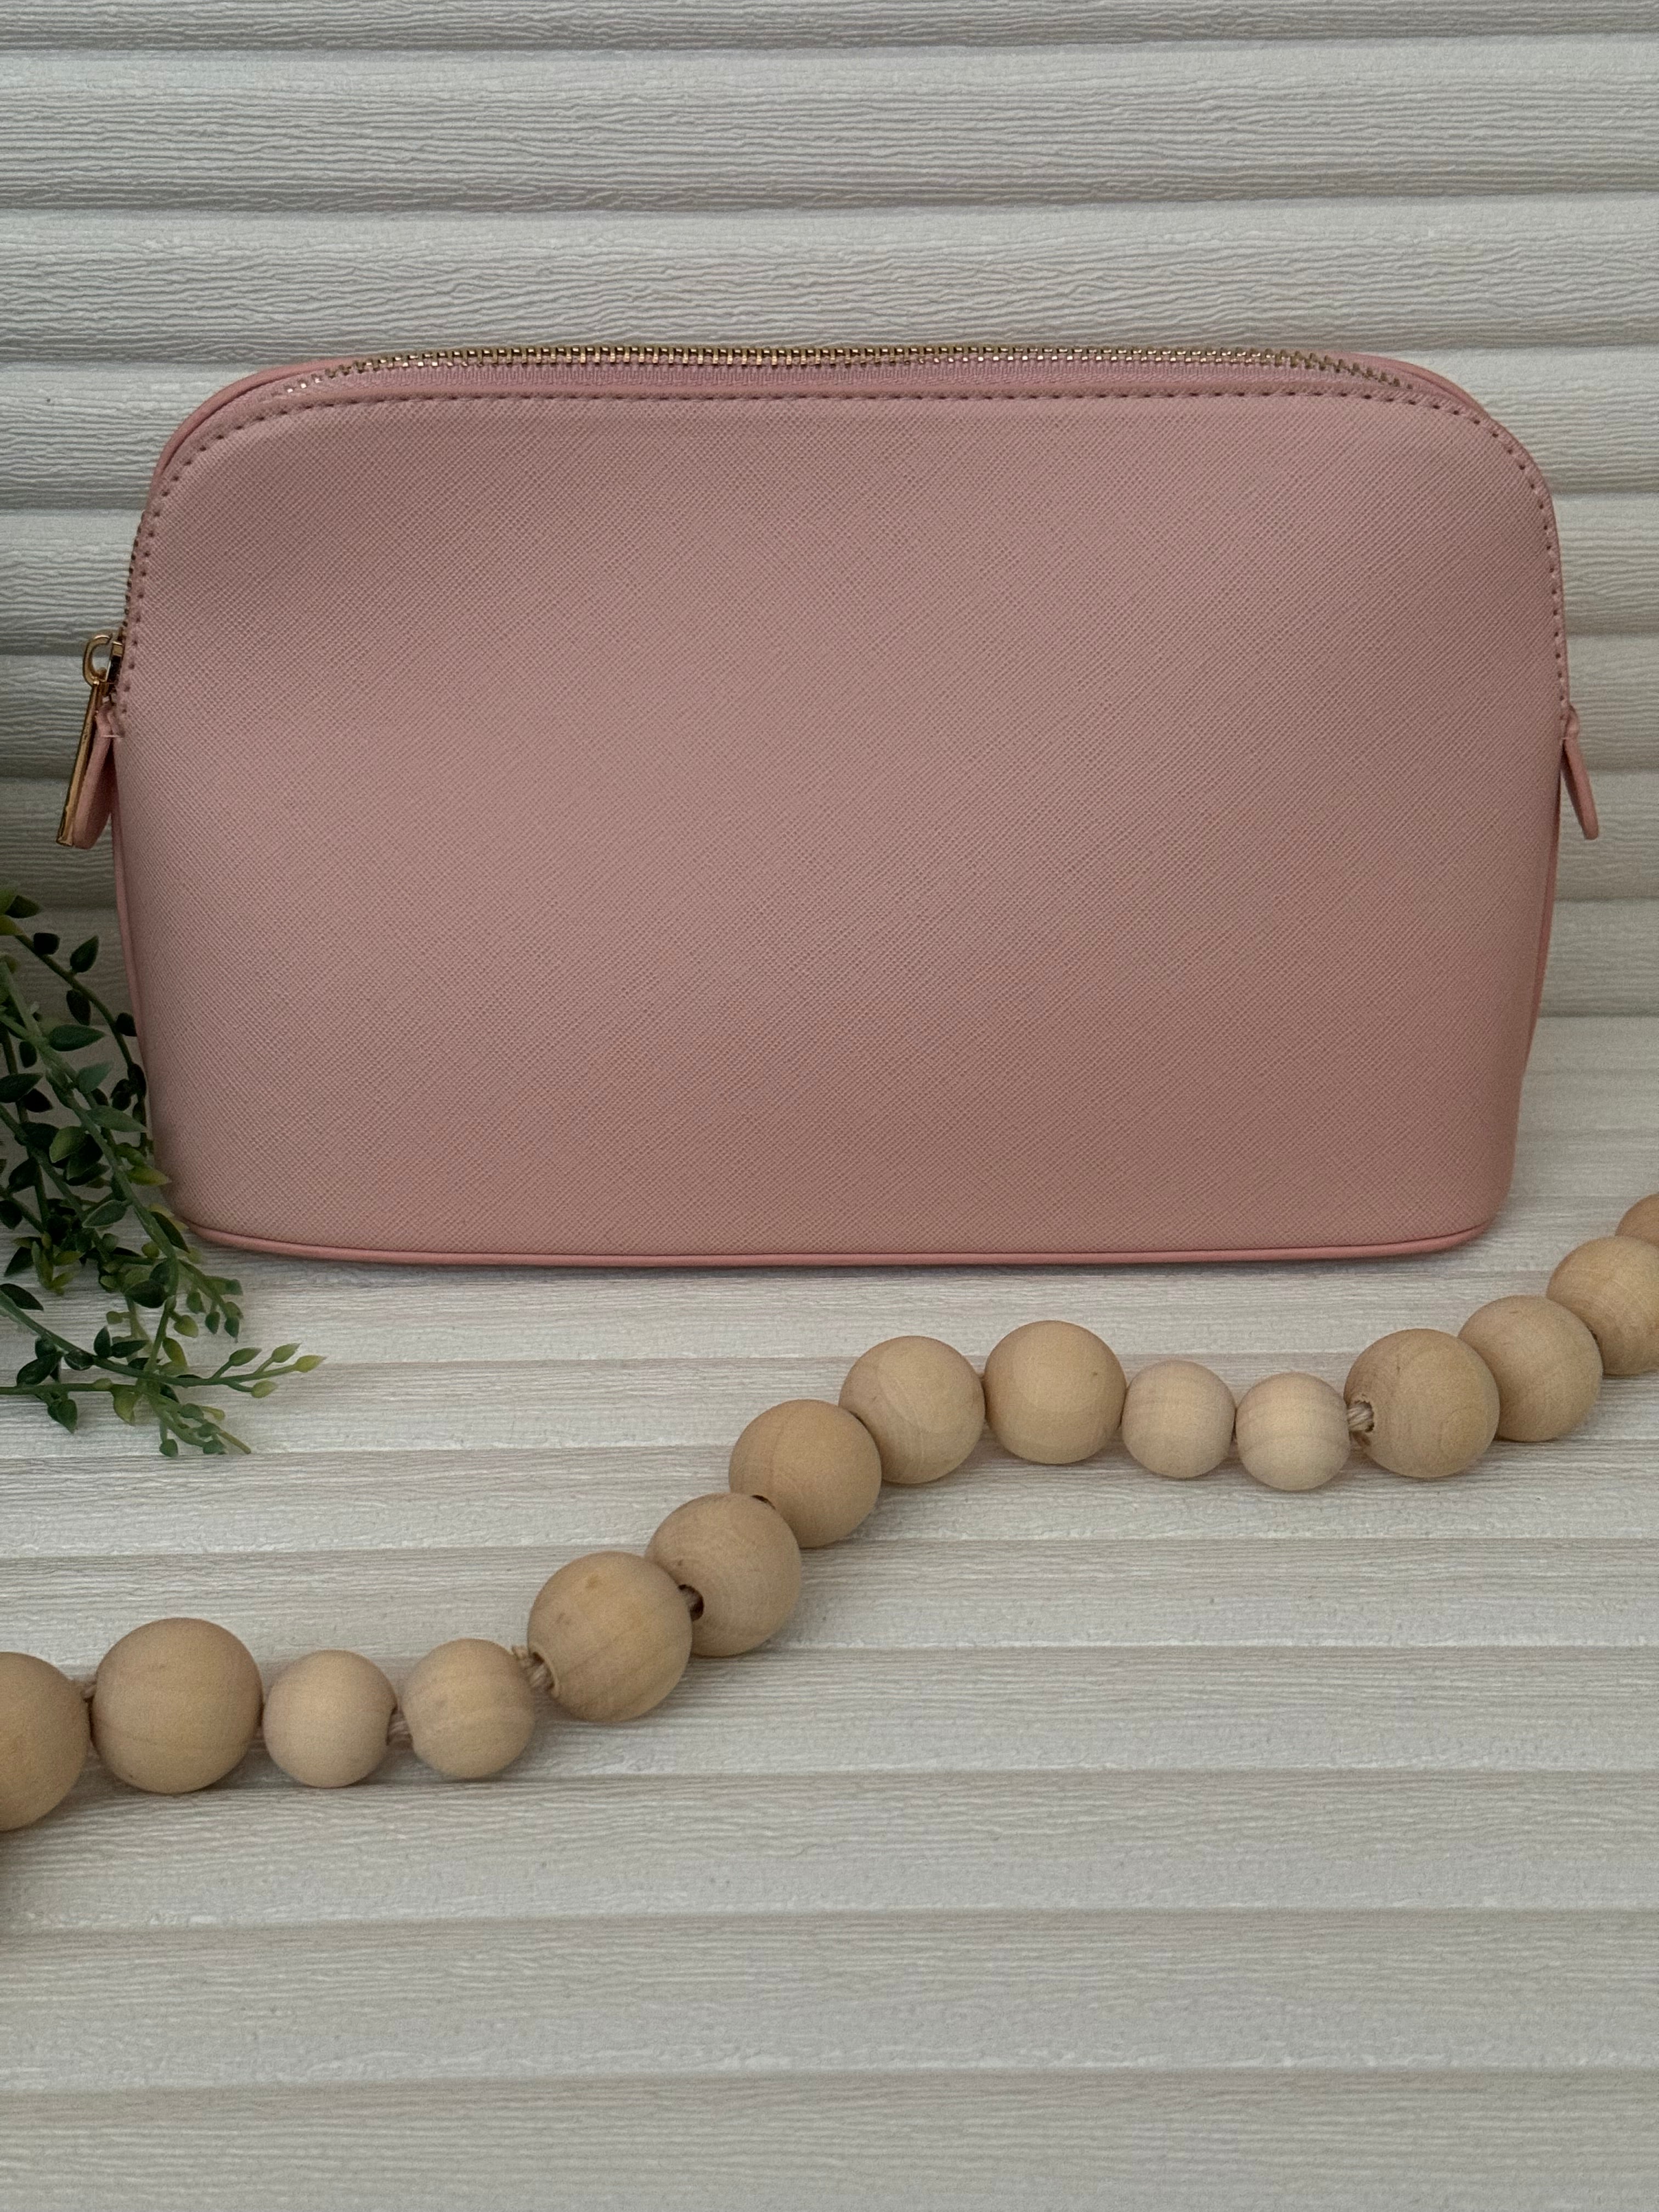 PU Saffiano Leatherette Make Up Case - Only The Sweet Stuff